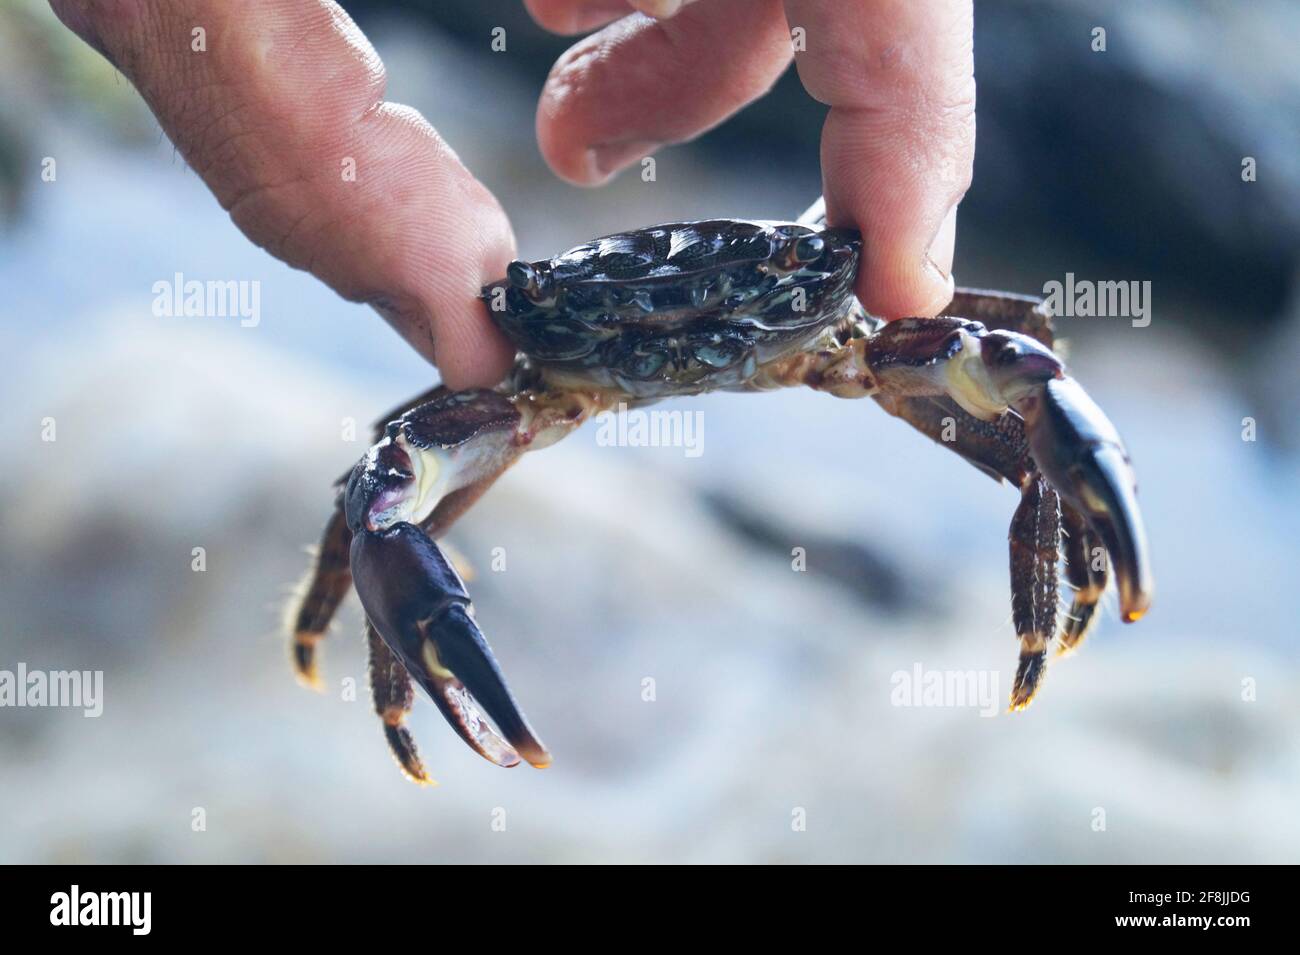 Black sea crab looks full-face in the hands of a man Stock Photo